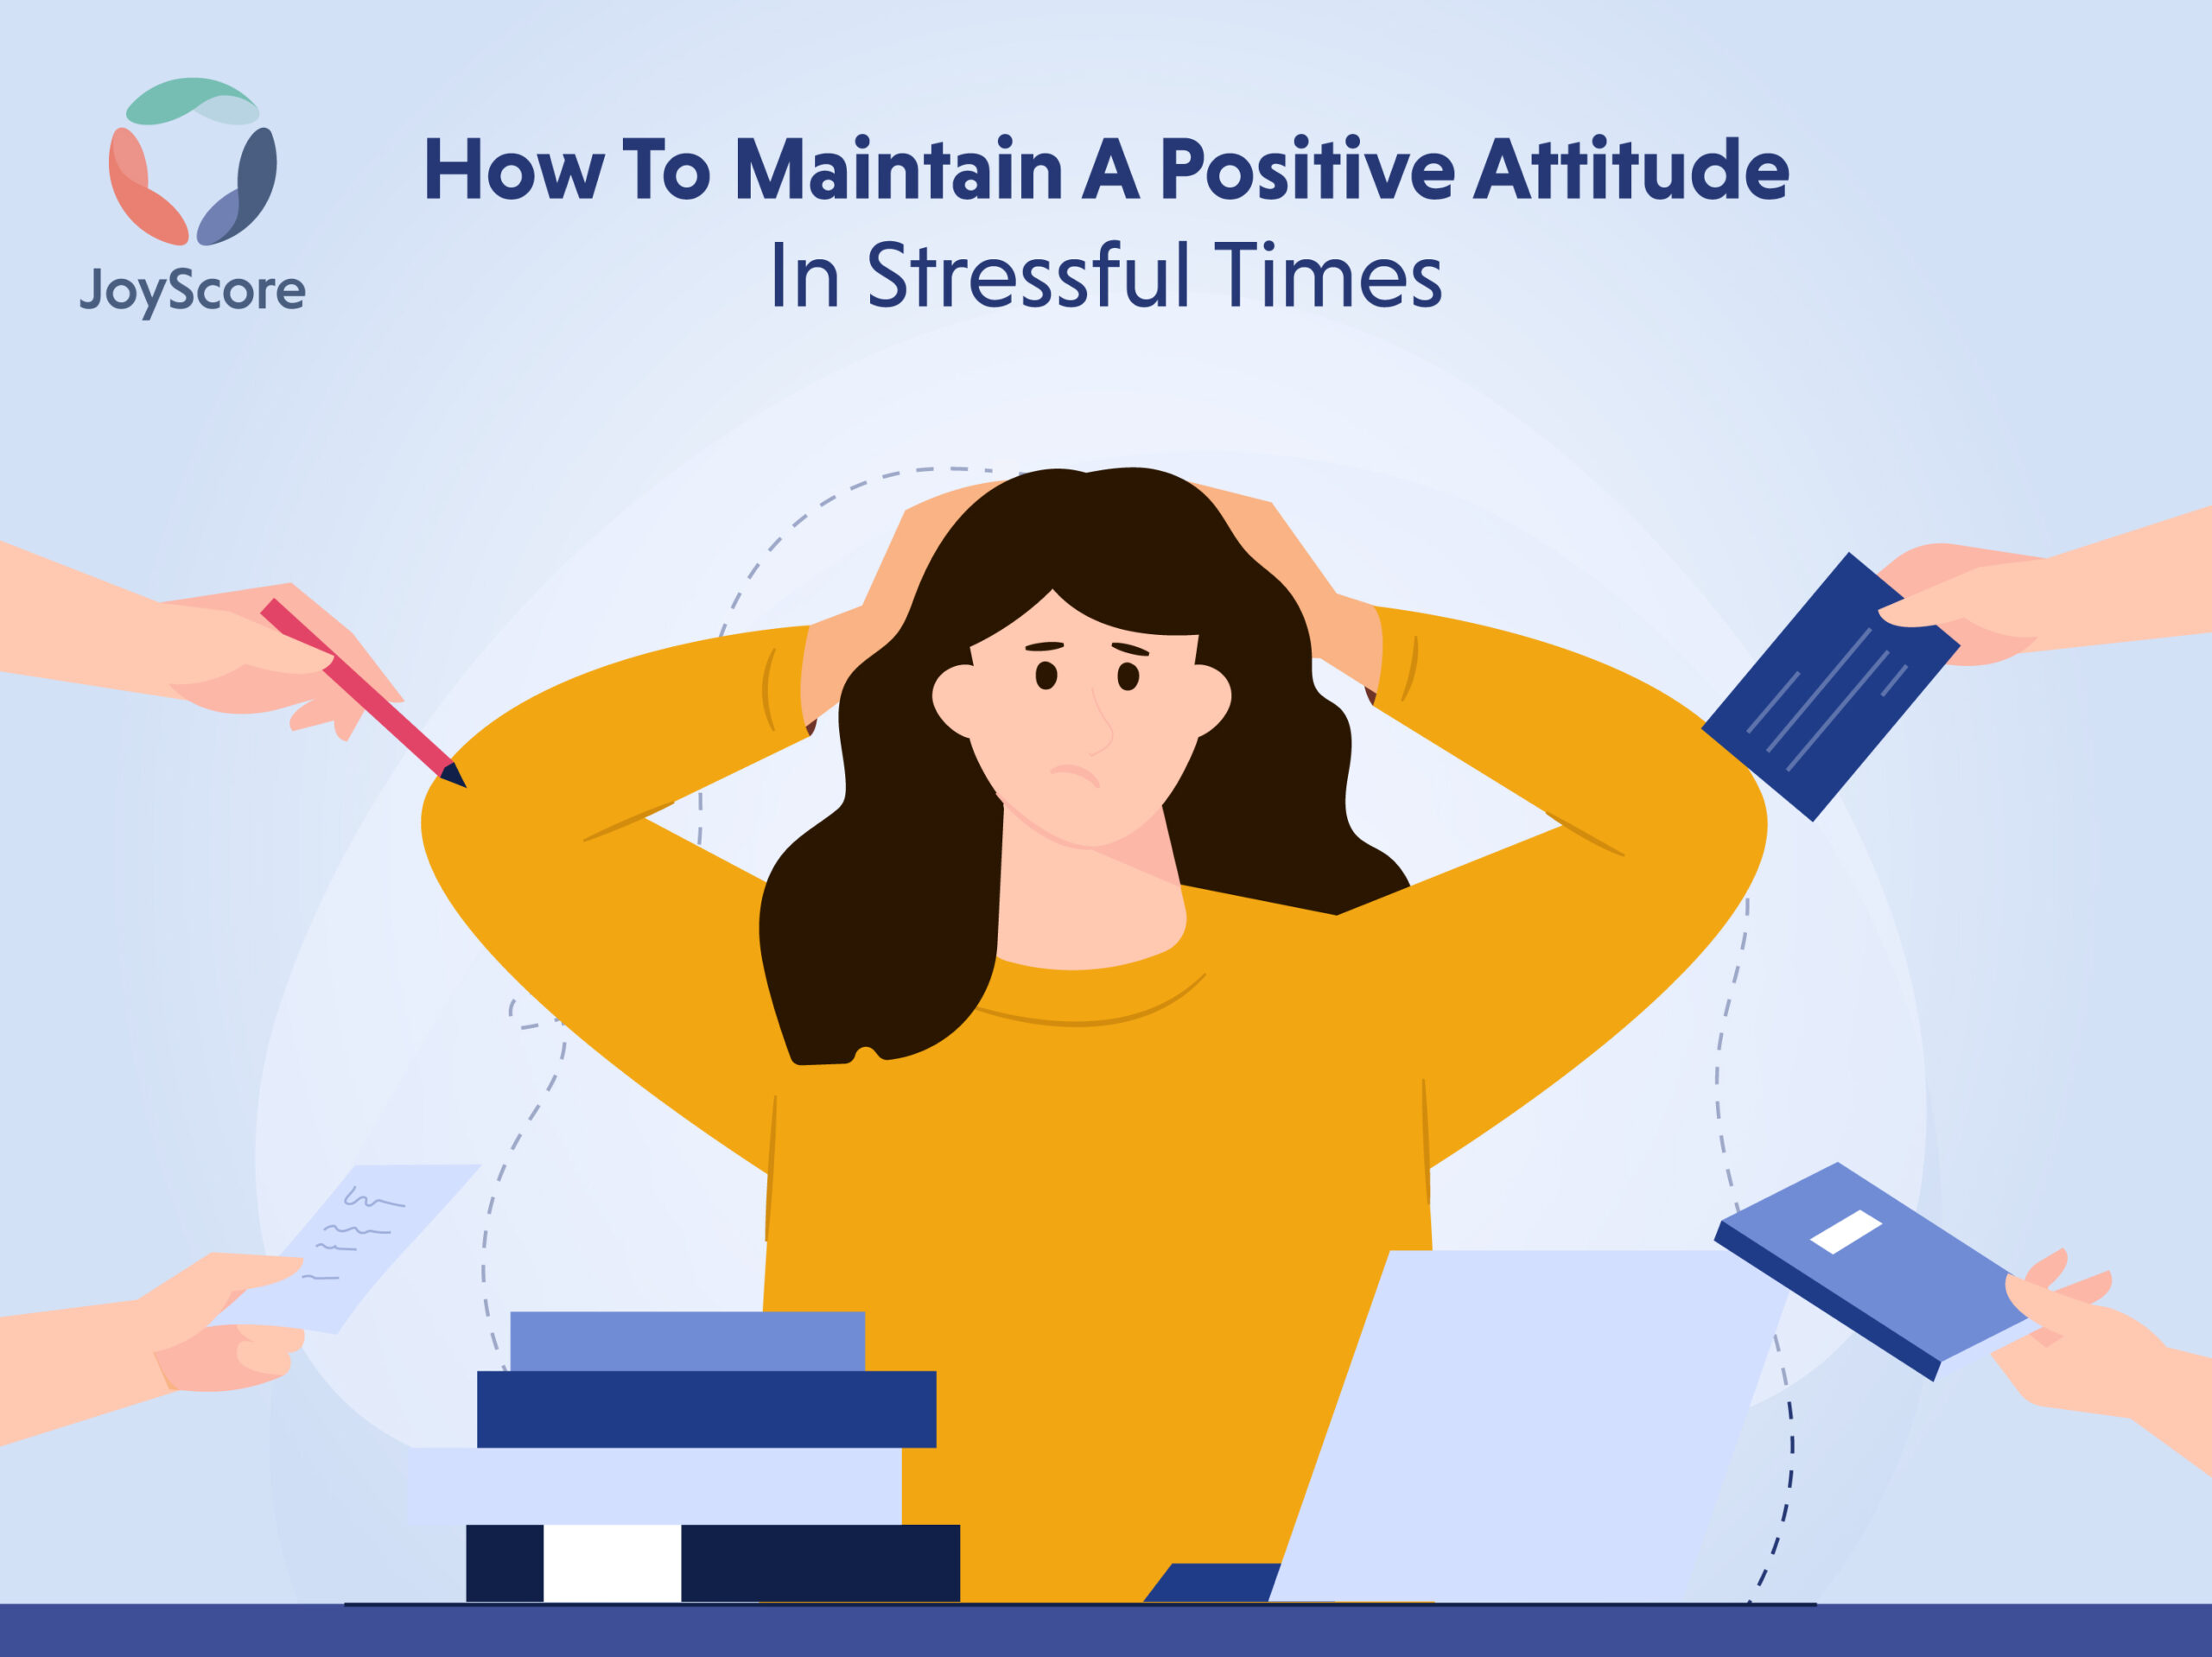 How to maintain a positive attitude in stressful times